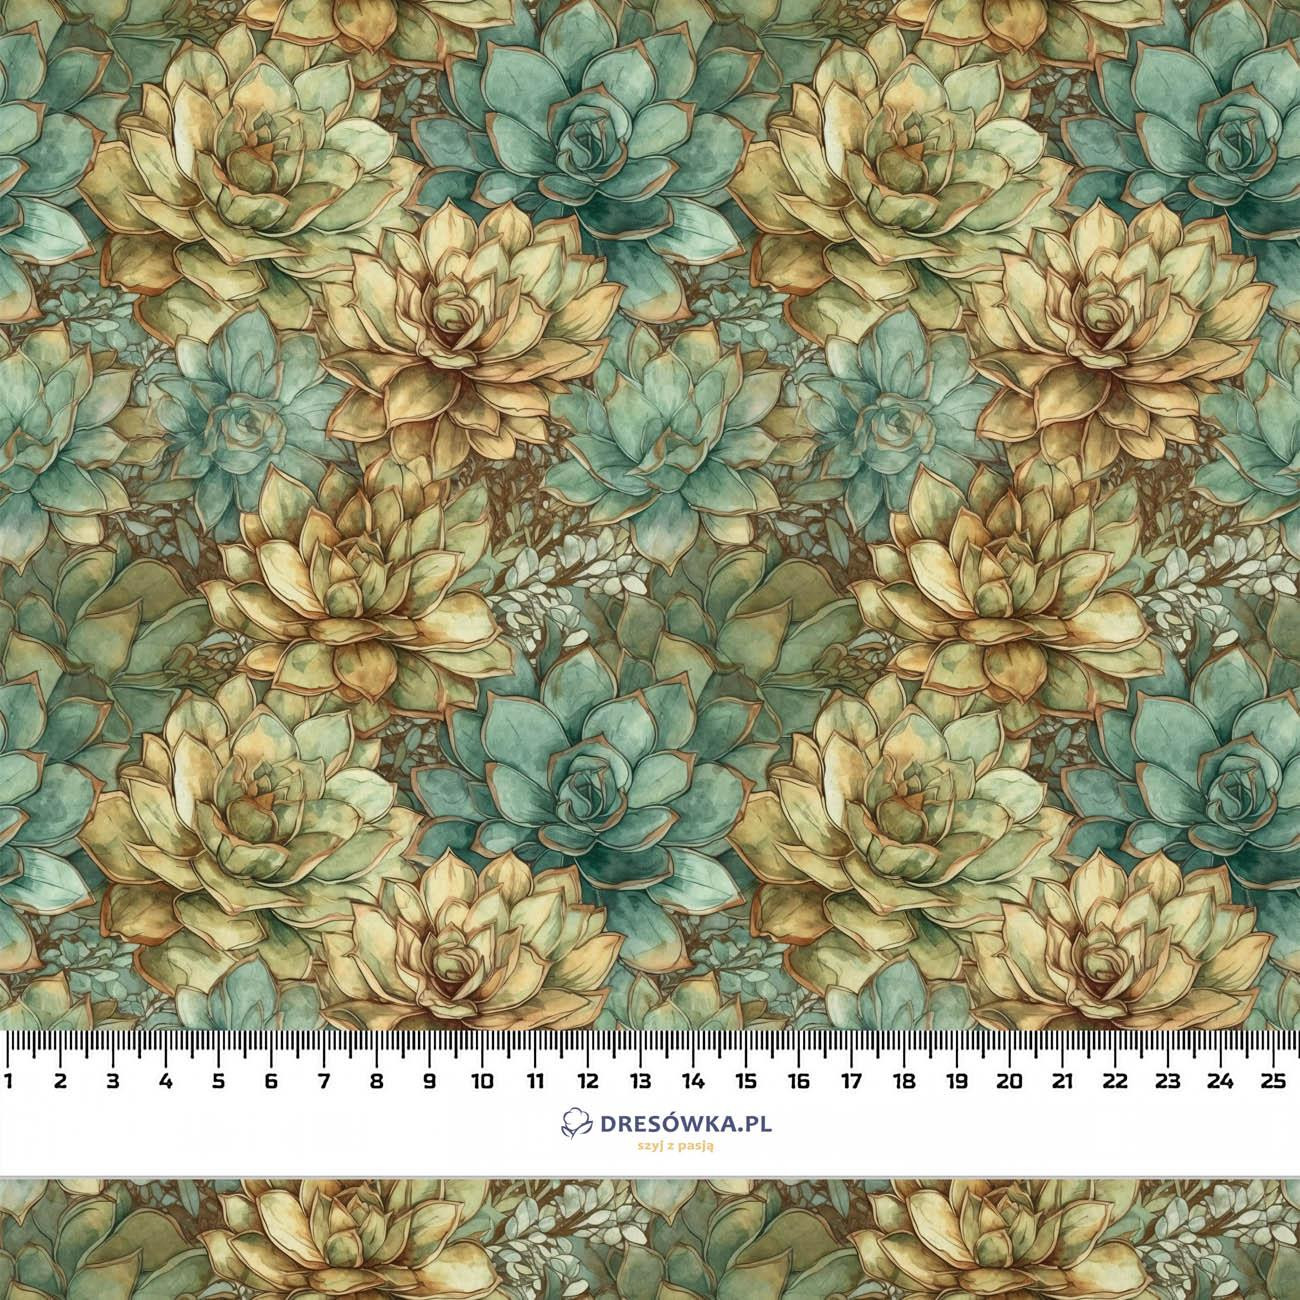 SUCCULENT PLANTS PAT. 2 - quick-drying woven fabric